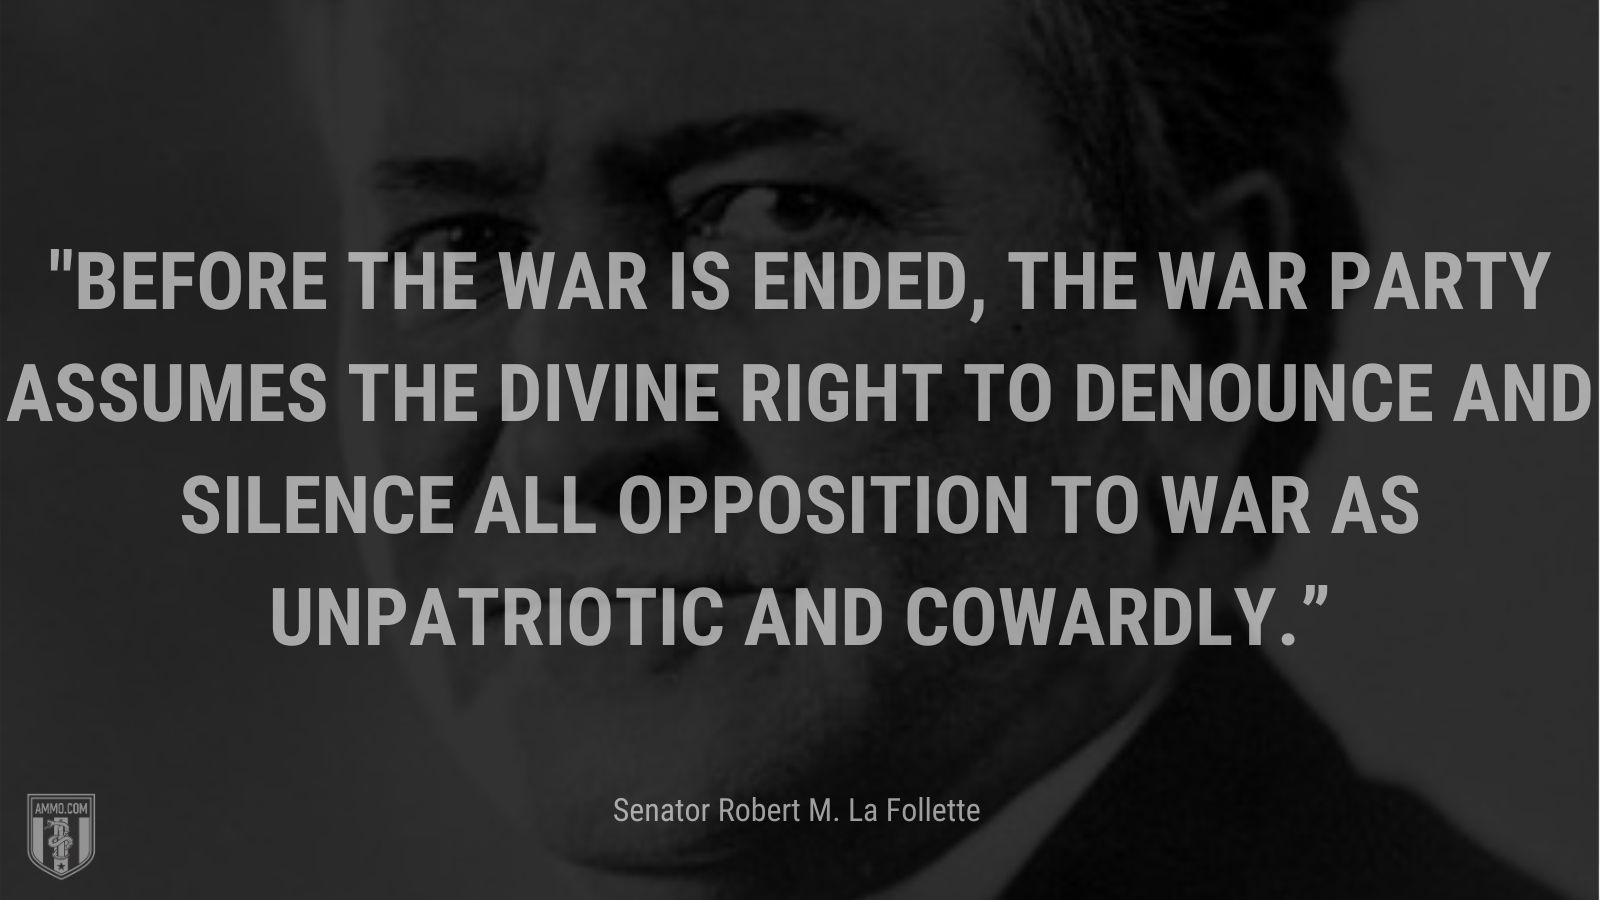 “Before the war is ended, the war party assumes the divine right to denounce and silence all opposition to war as unpatriotic and cowardly.” - Senator Robert M. La Follette